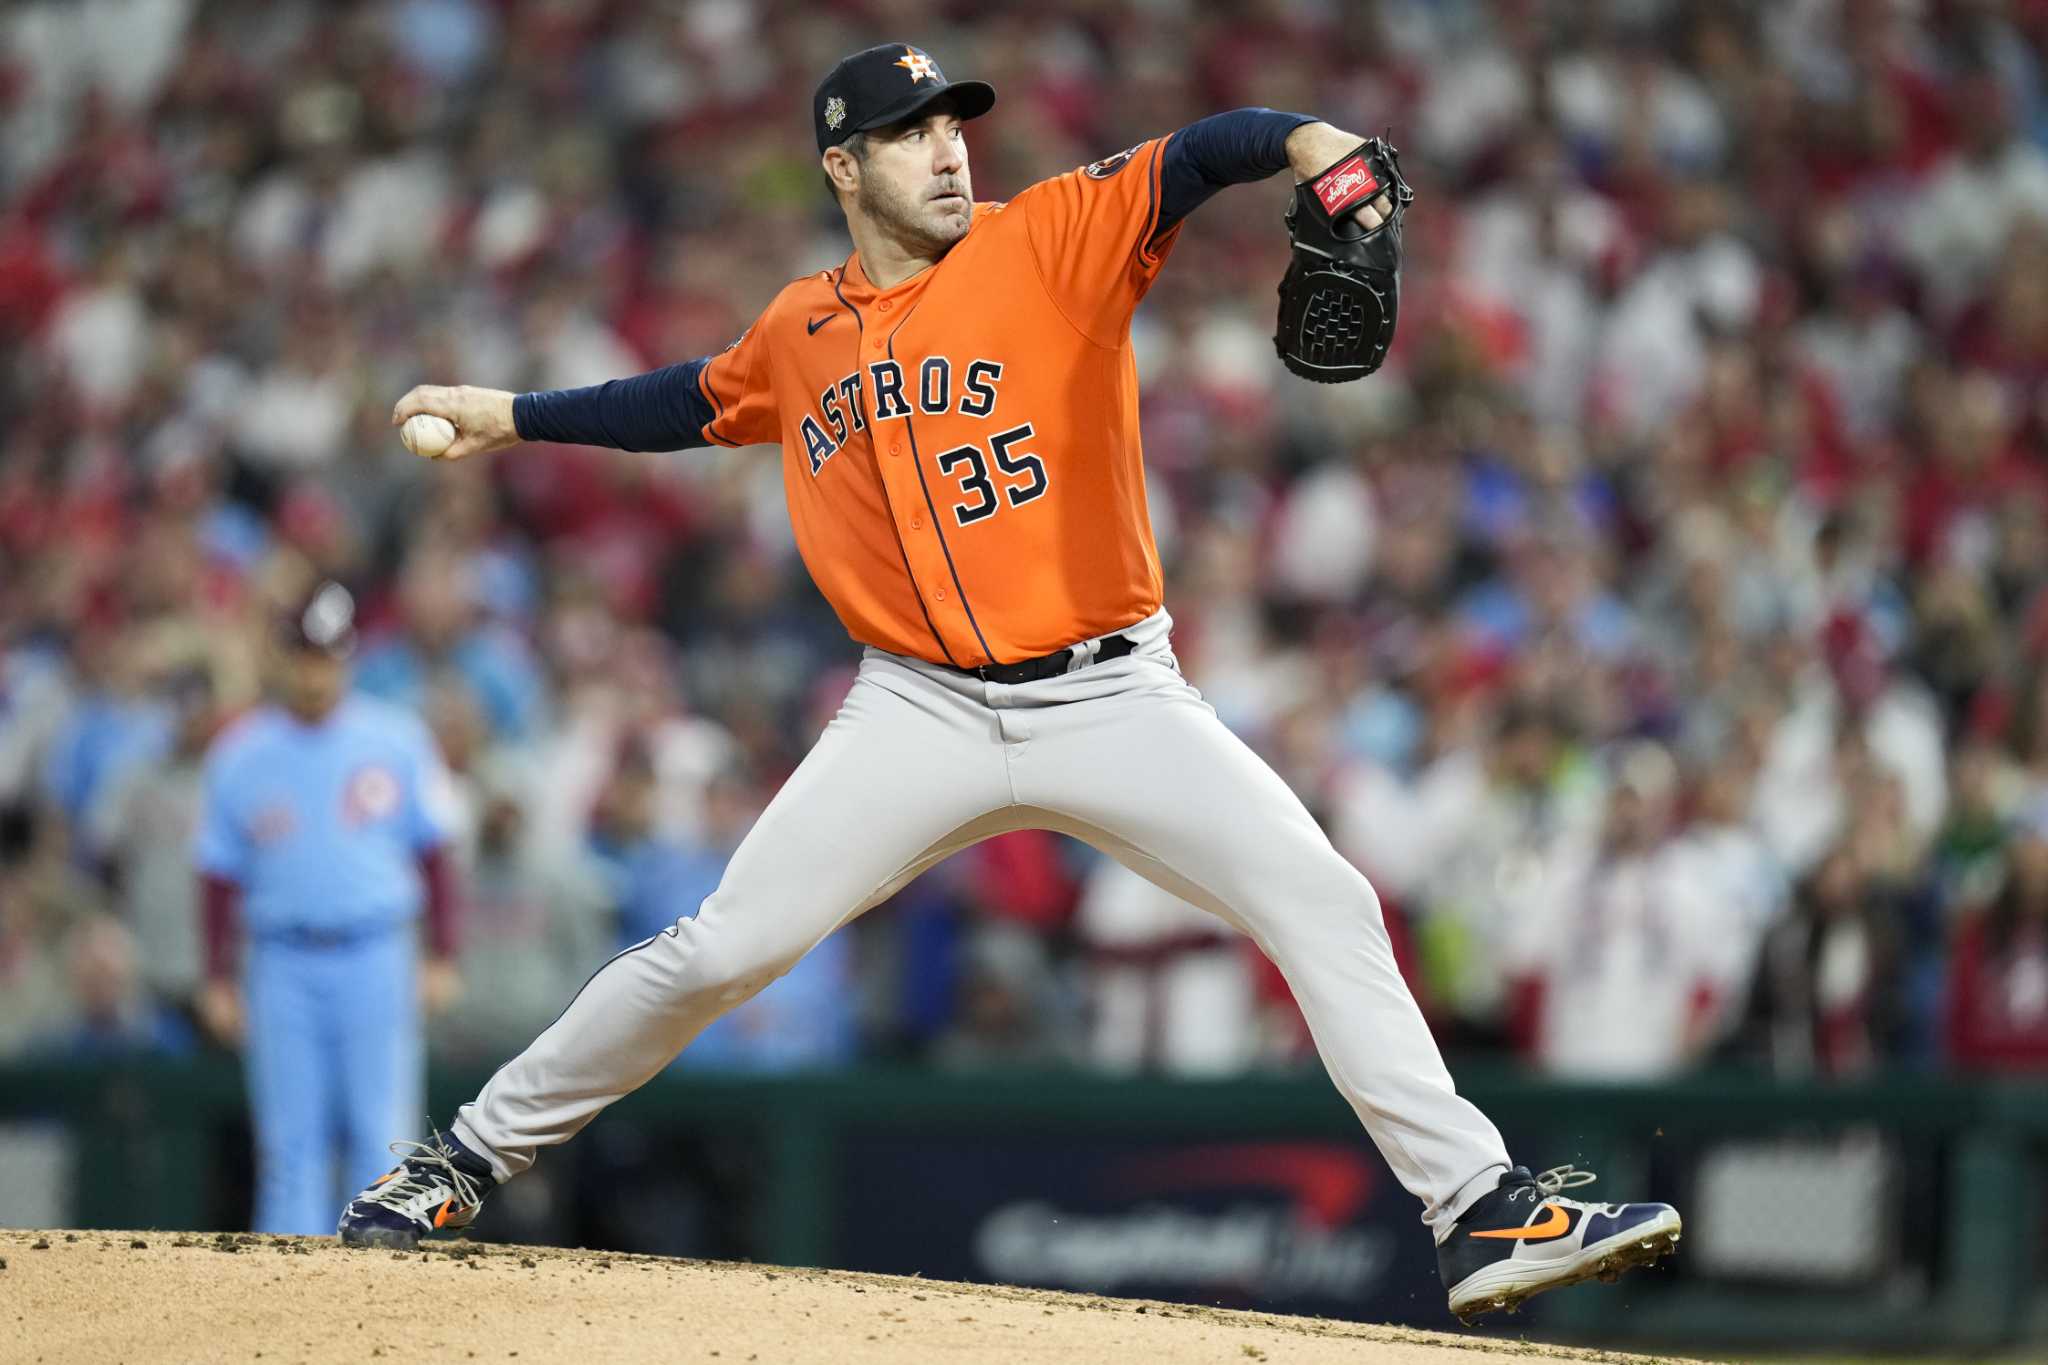 Houston Astros - Congratulations Justin Verlander on 3,000 career innings!  👏 JV is one of 17 pitchers in MLB history to reach both 3,000 innings  pitched and 3,000 strikeouts. #LevelUp